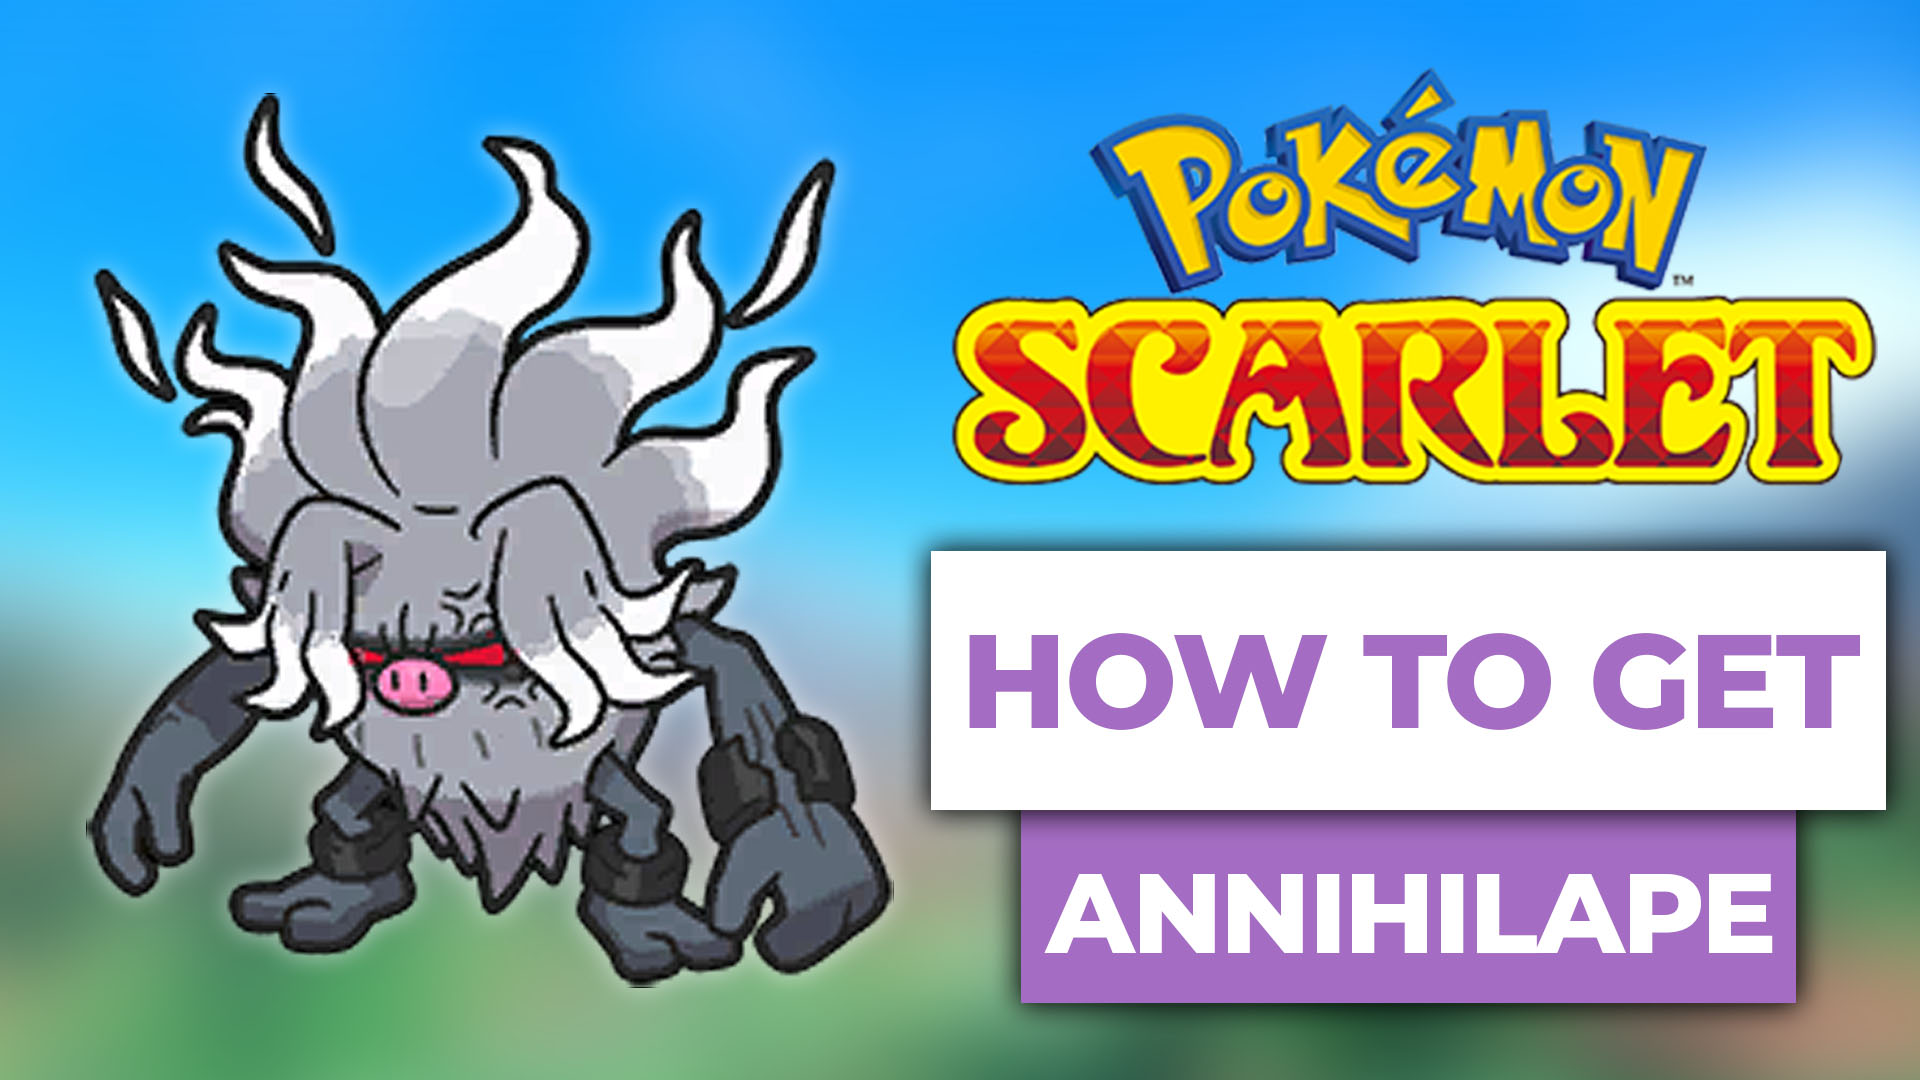 How To Get Annihilape In Pokemon Scarlet & Violet (The Easy Way)